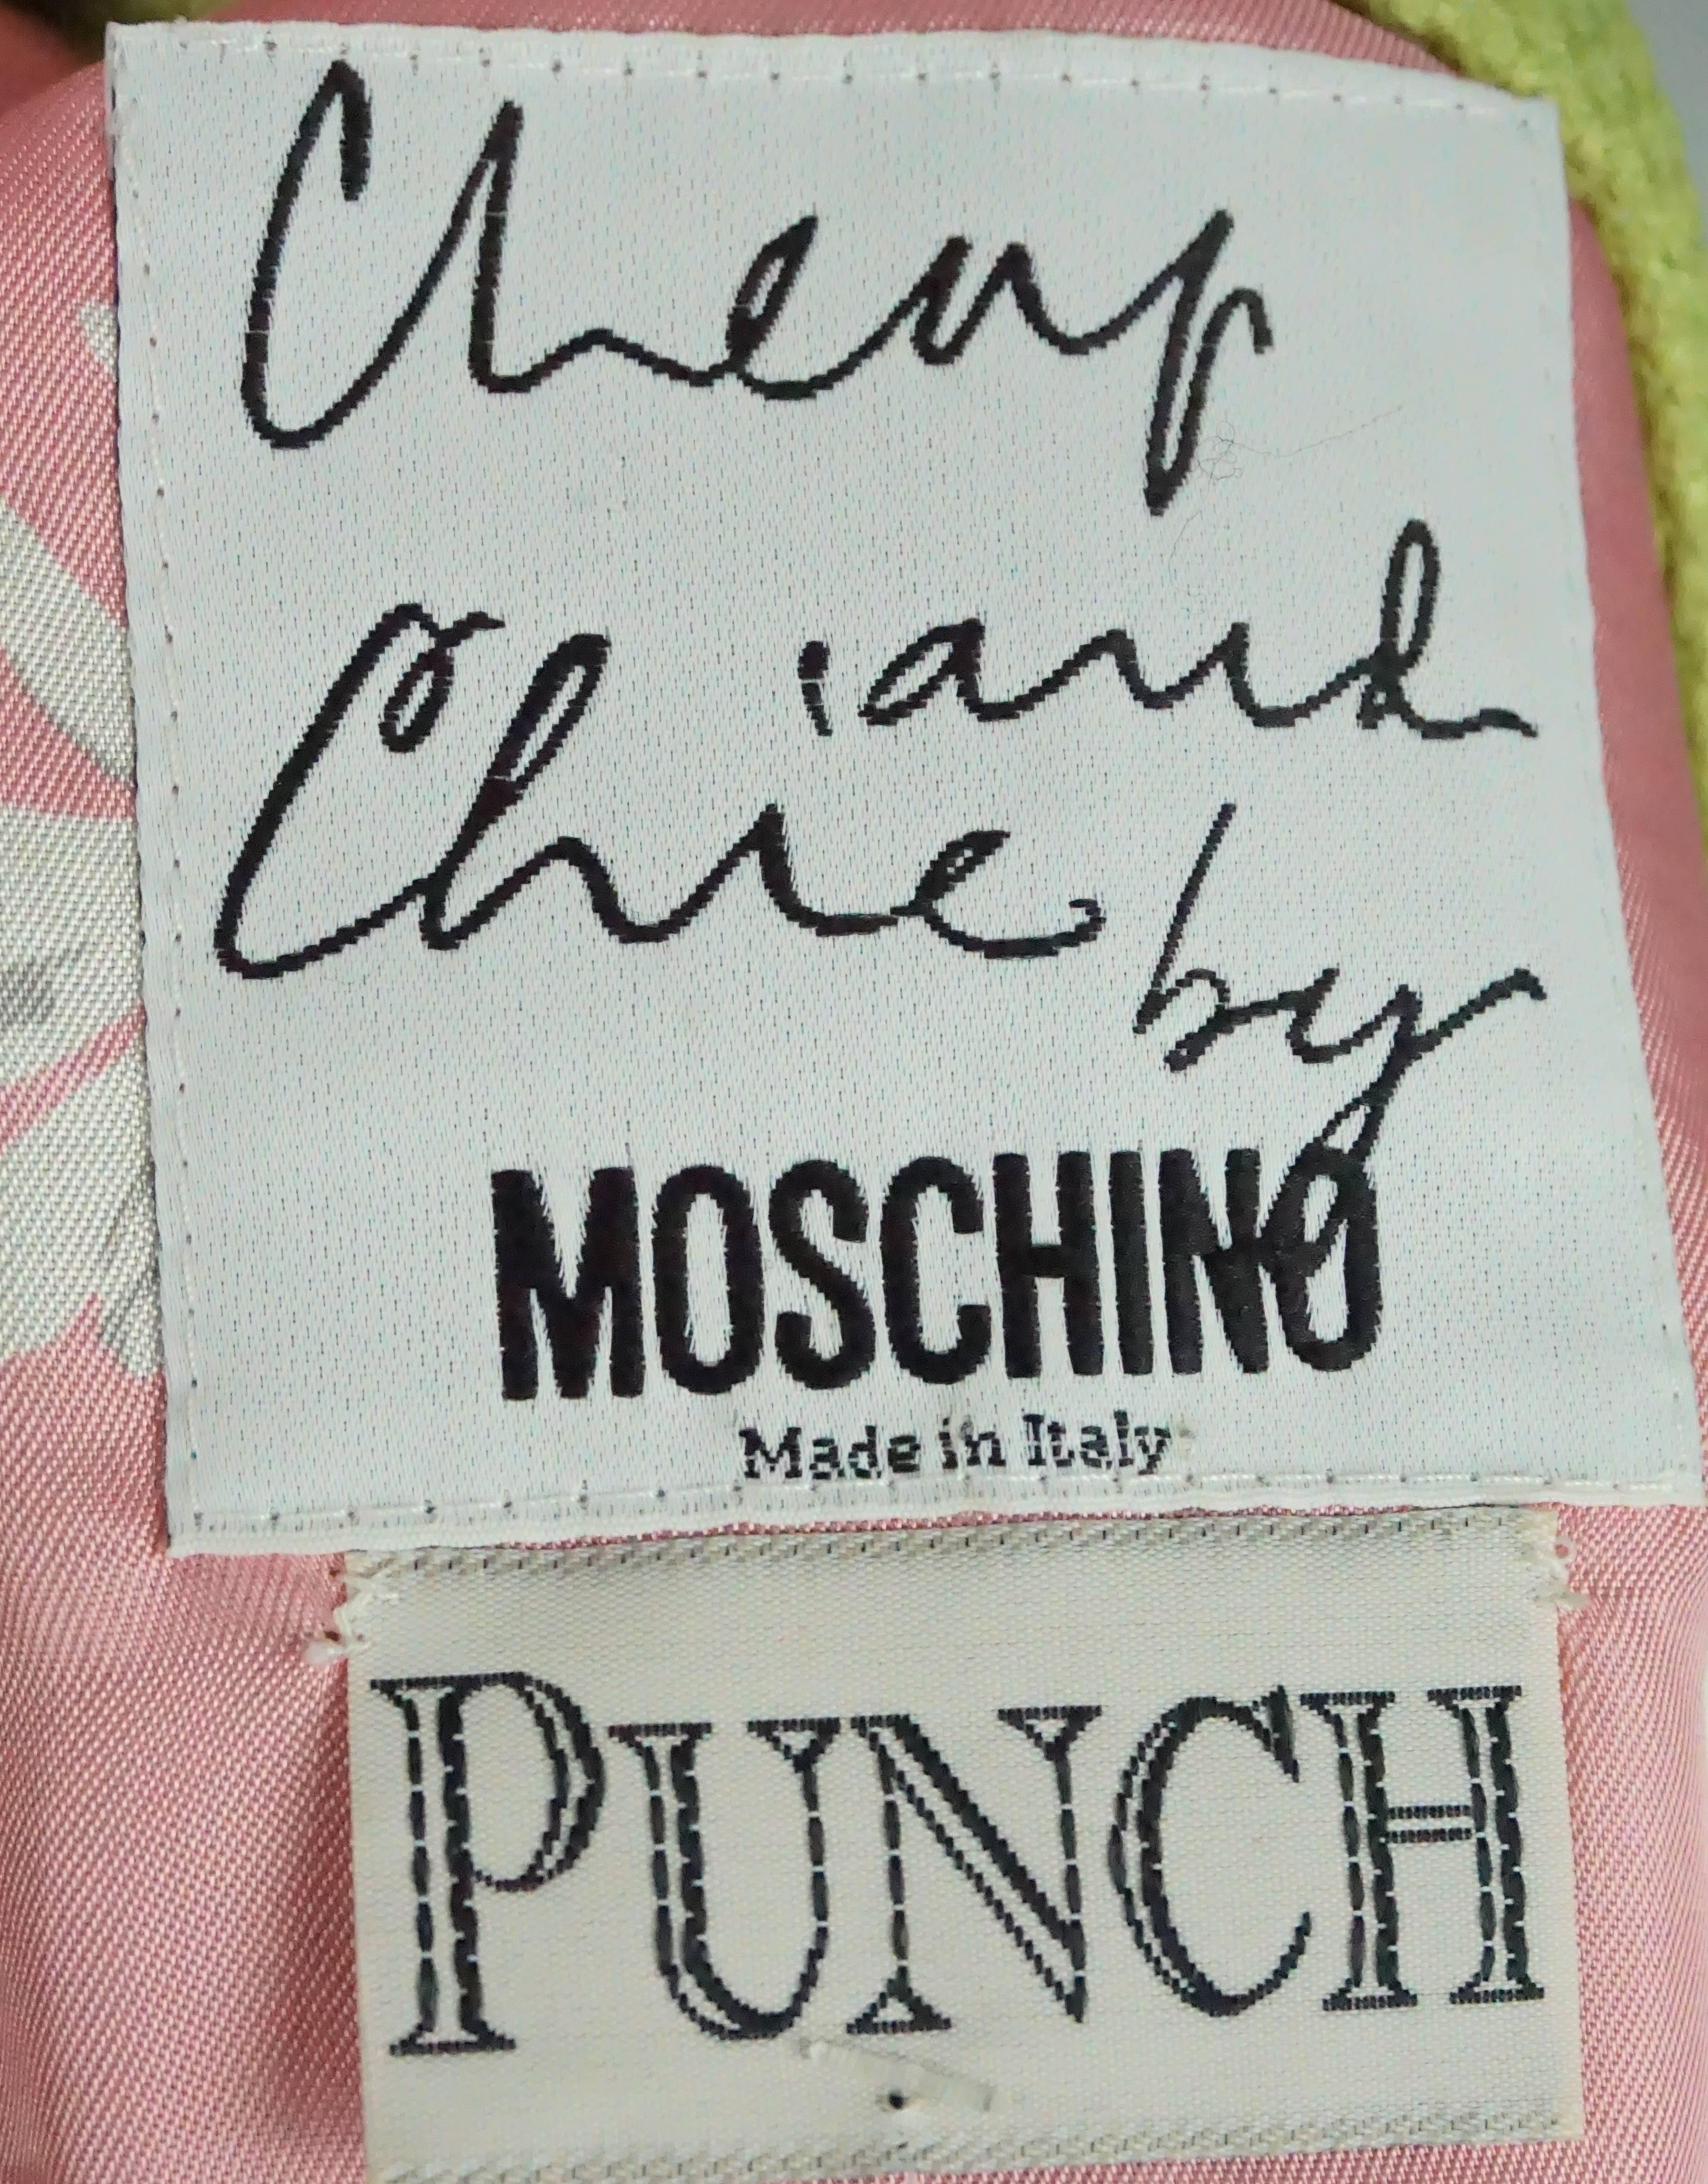 Moschino Cheap and Chic Jacket/Skirt/Top Lime Green Pique w/ Pink Silk Trim - 4 3